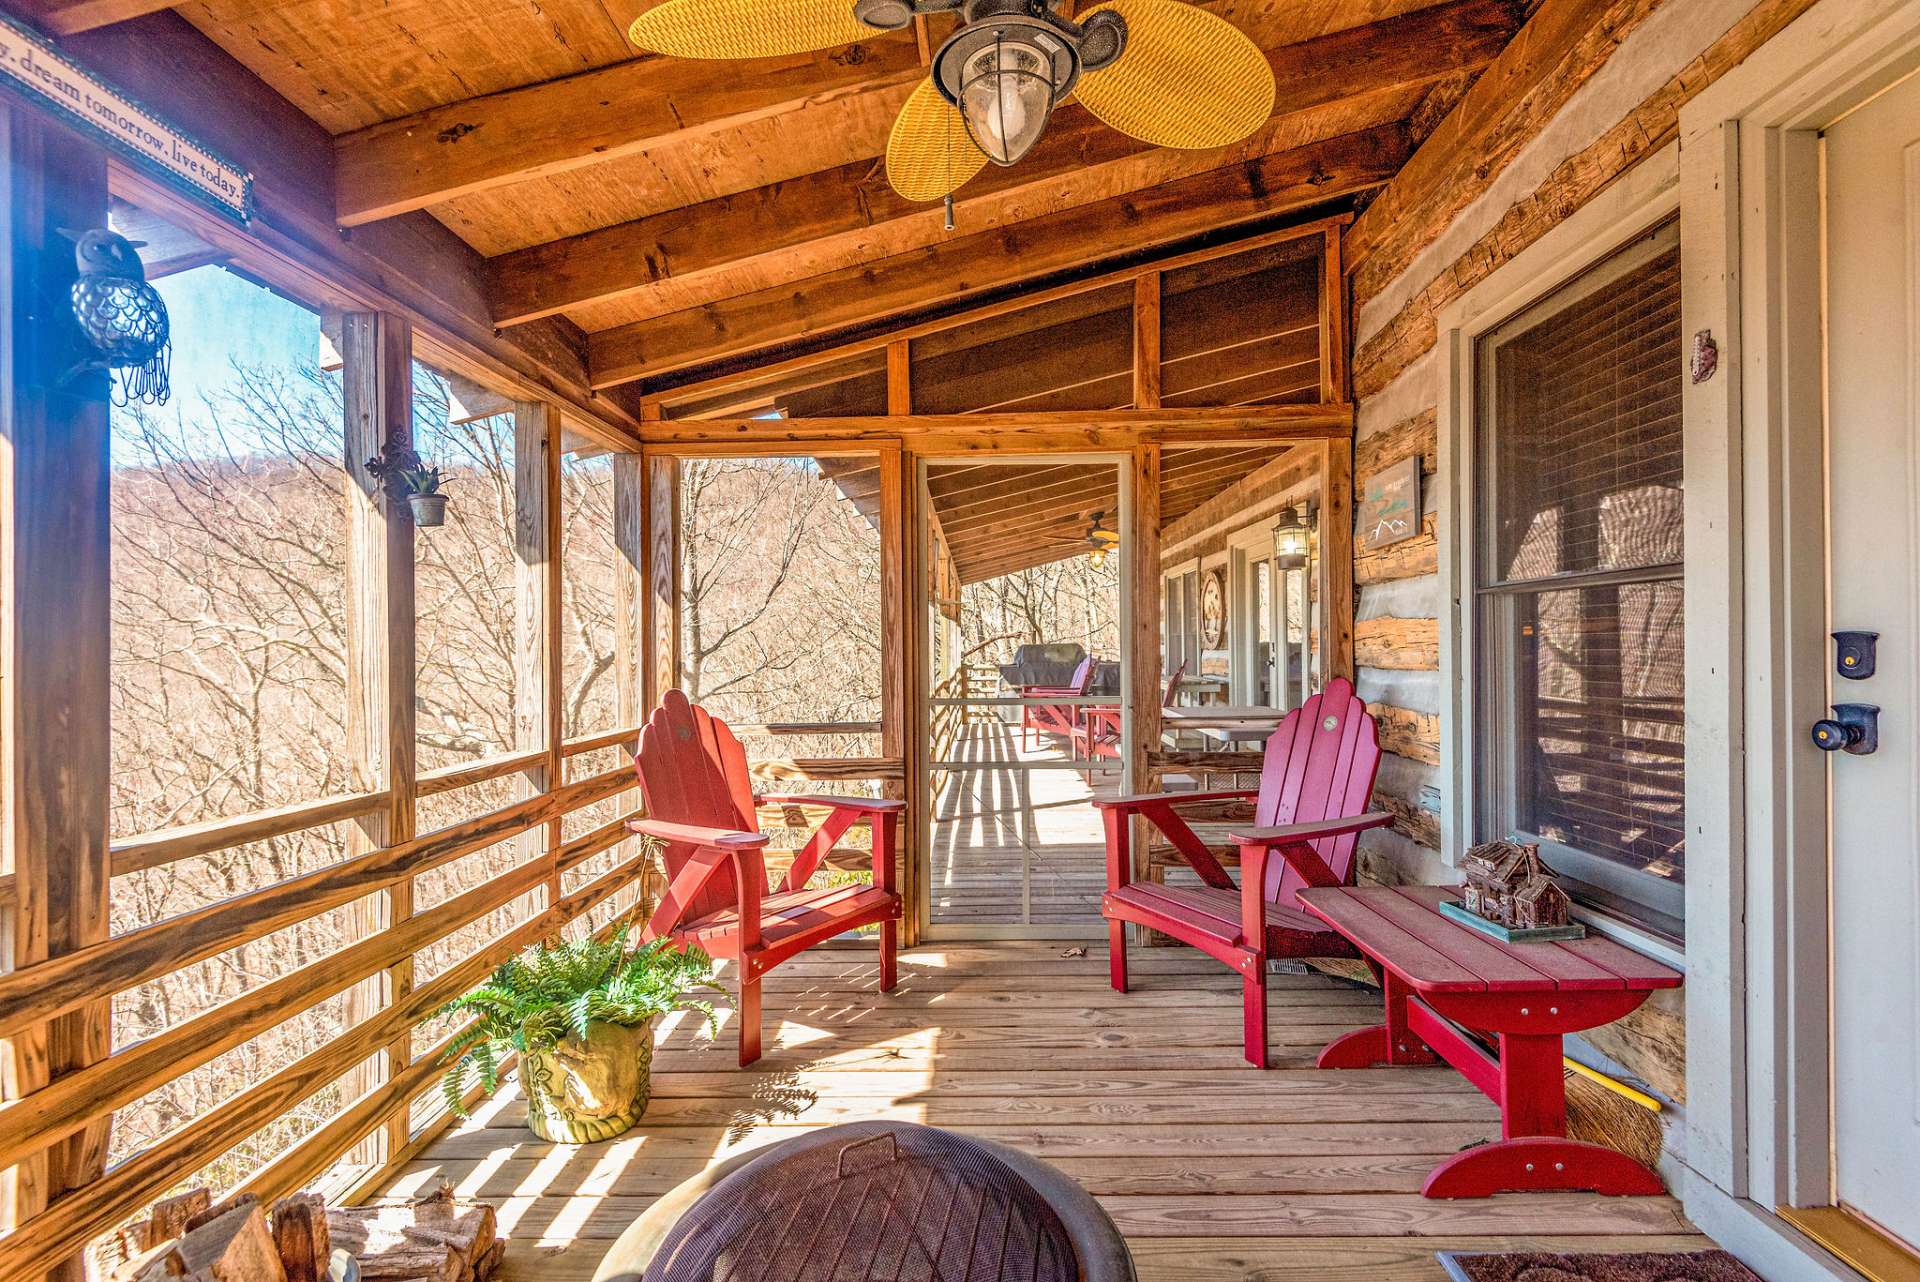 Enjoy the screened porch off the master bedroom.